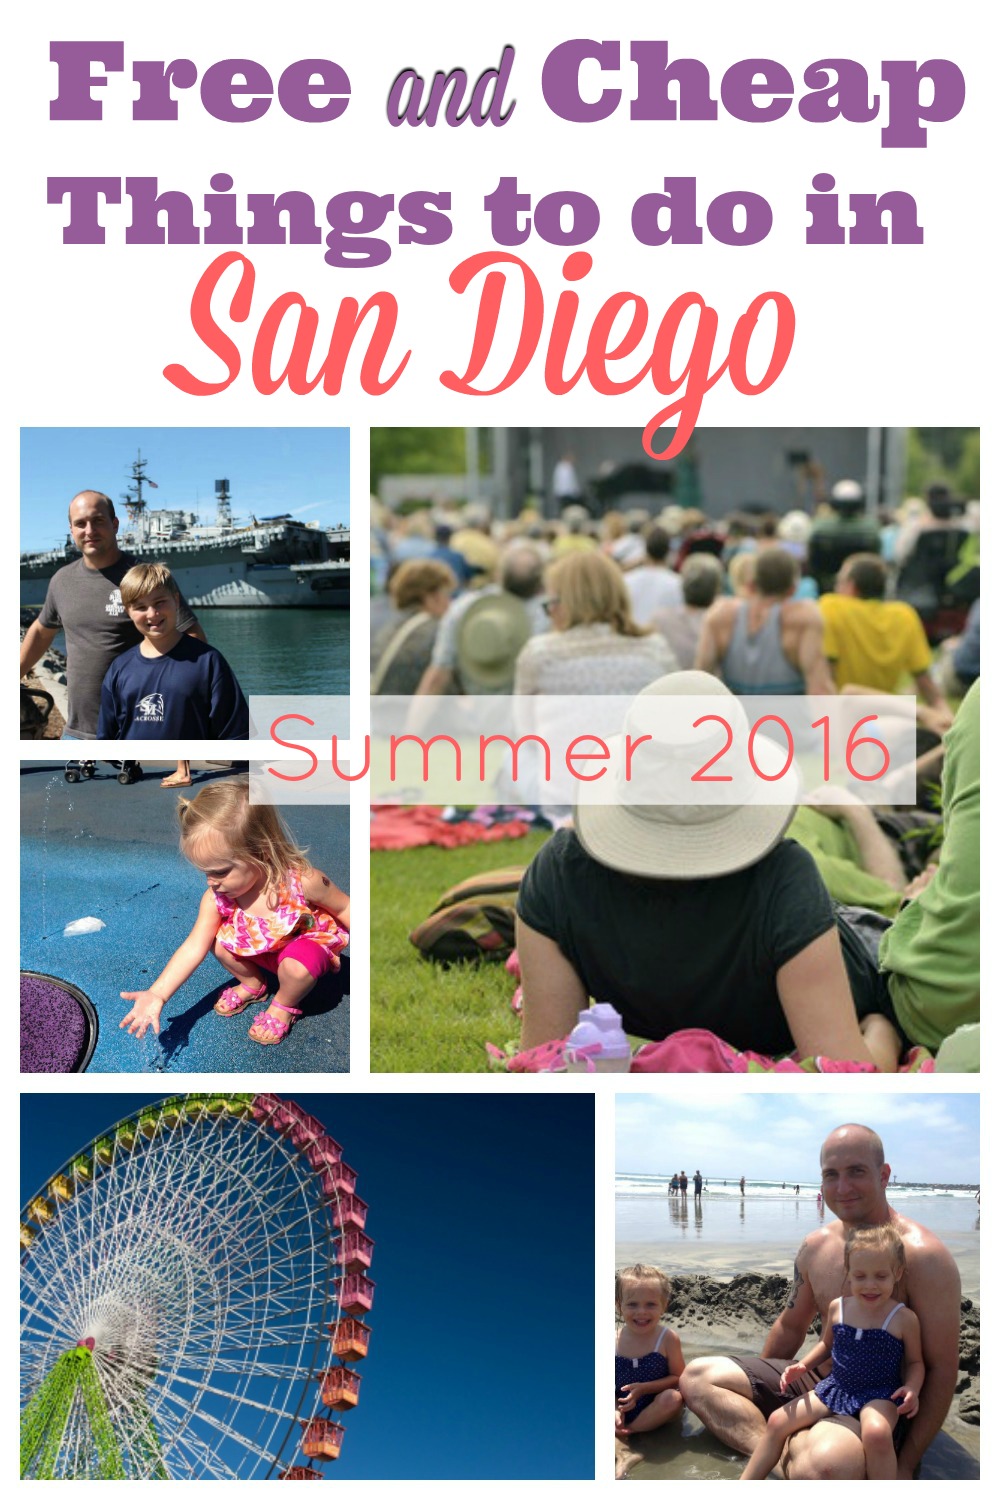 fun, free, and cheap things to do in San Diego this summer. Many cities have entertainment in semi- secret places where you can get the most out of your travel to America's Finest City. Take a tour through Old Town, watch a show, splash in the water... And have a great time!